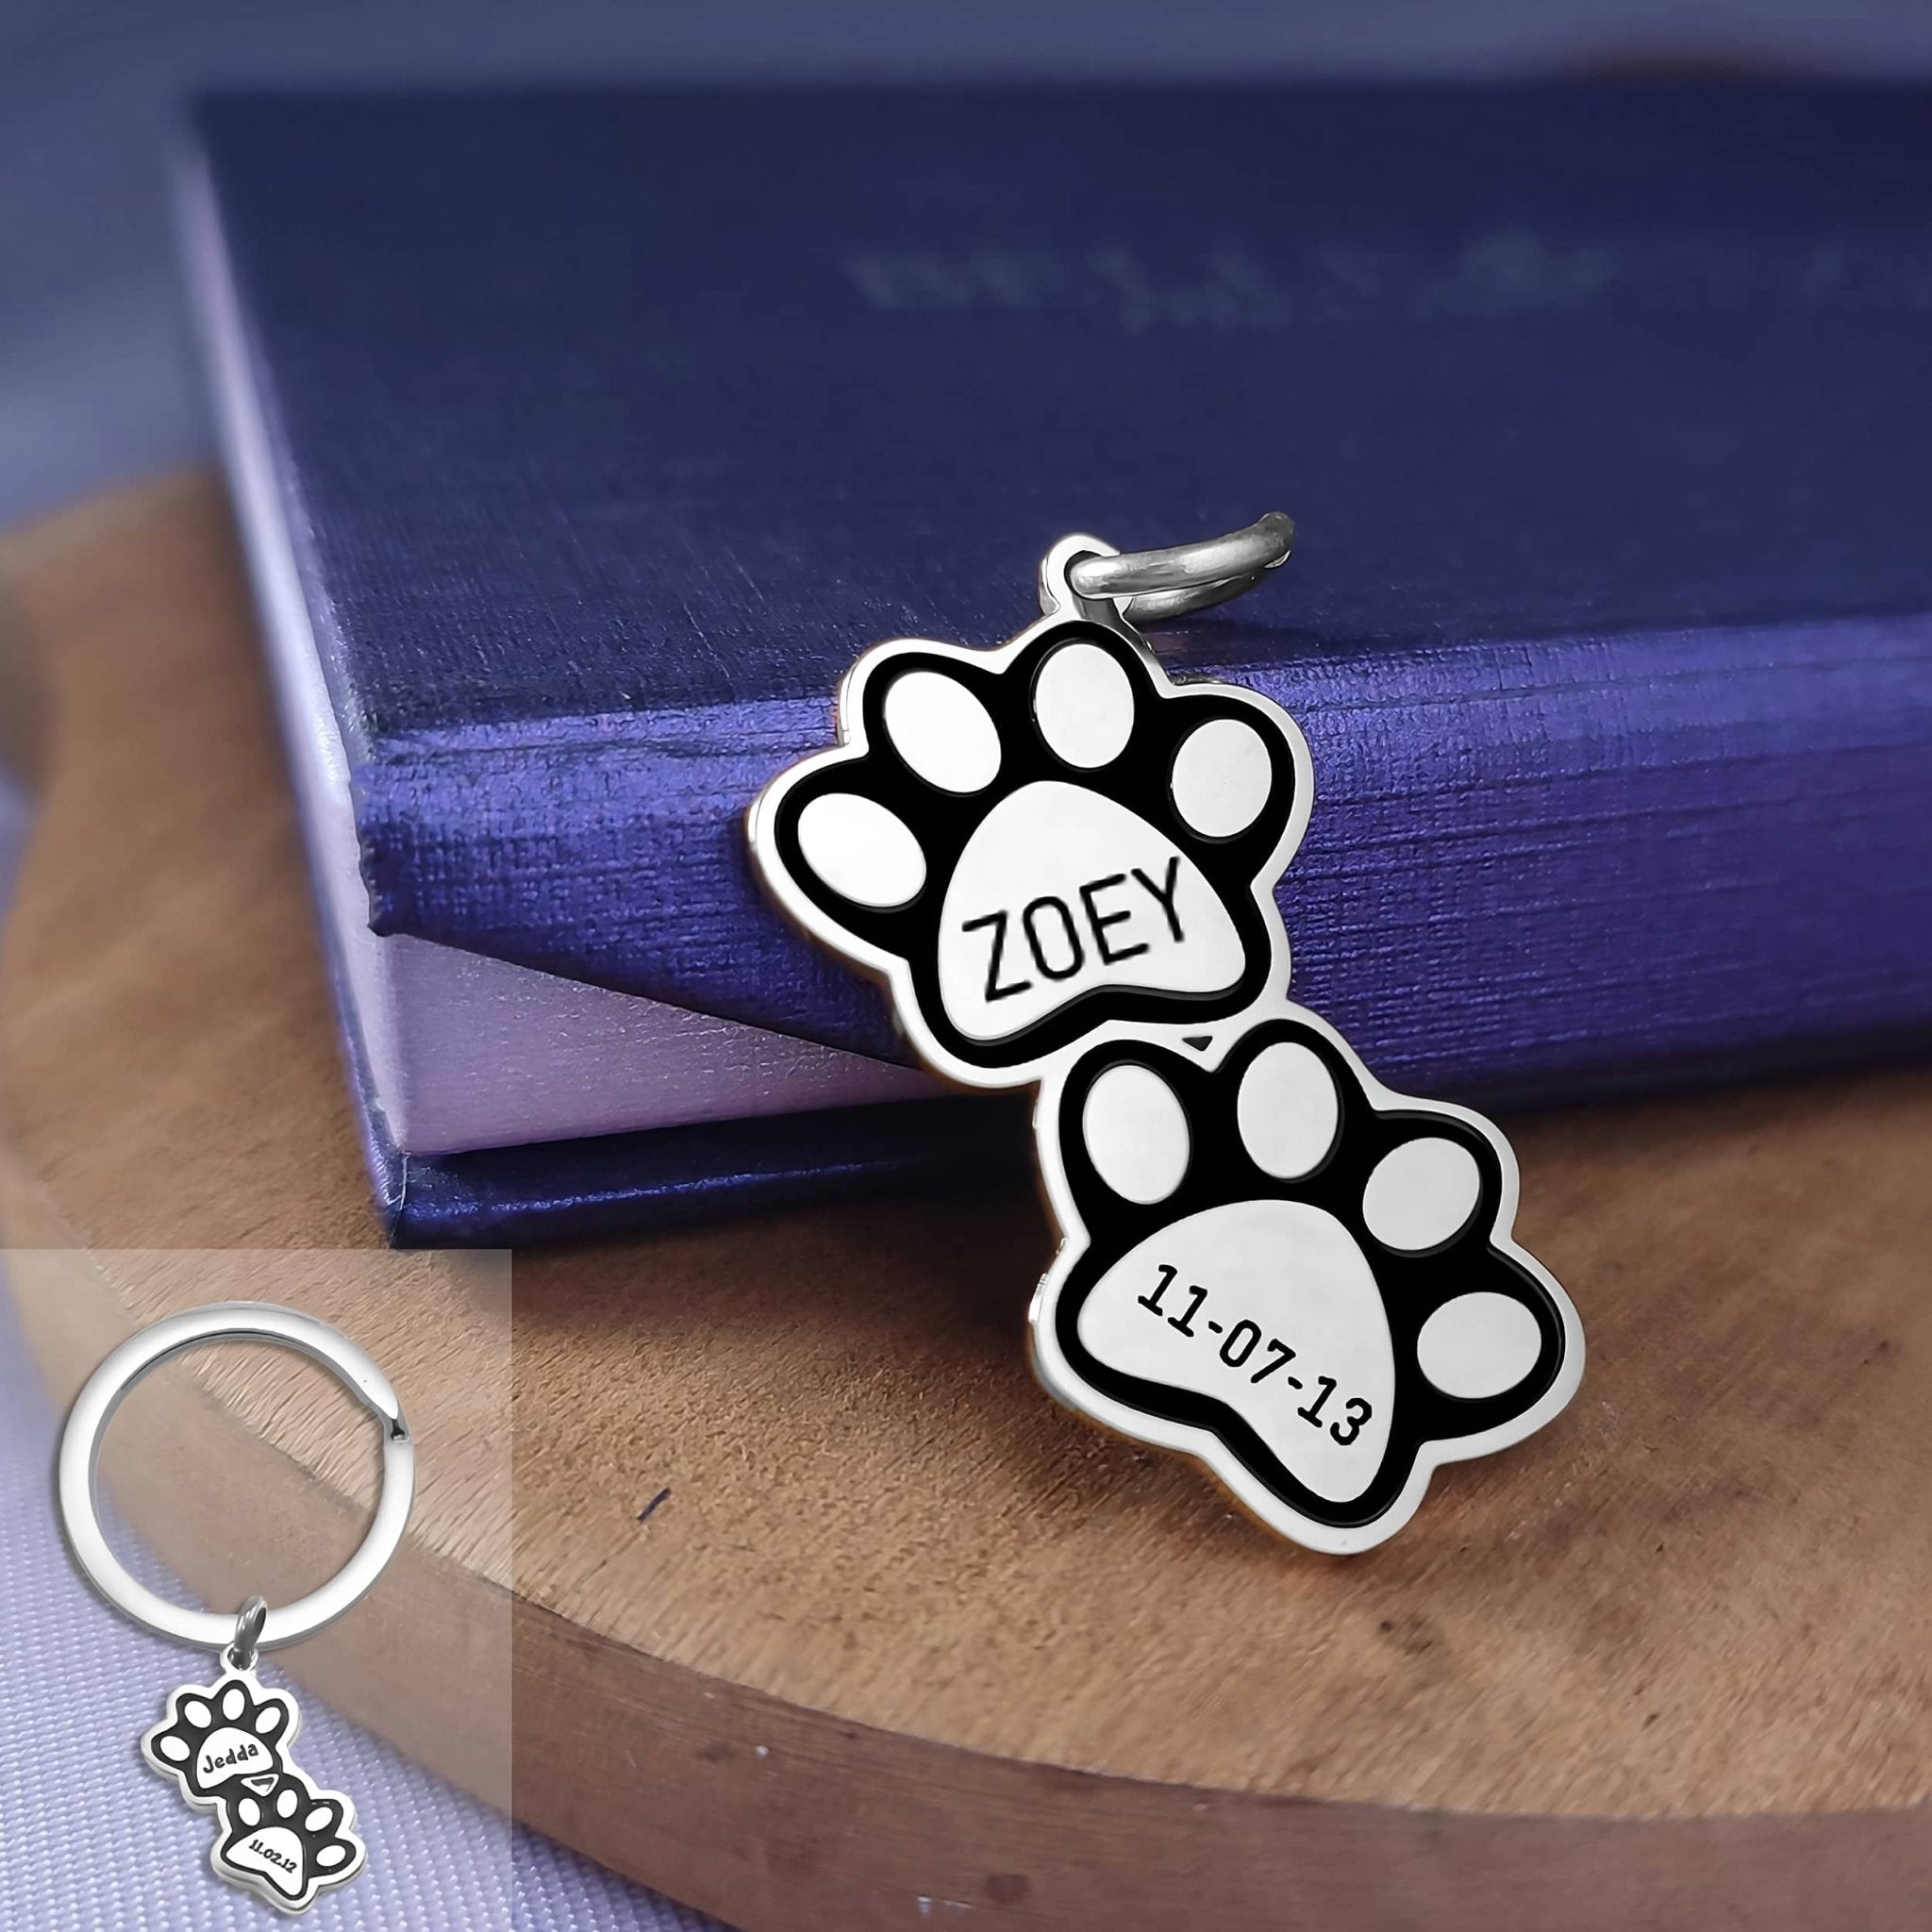 Double Mini Paw Prints Charm for Keyring - Keyrings by Belle Fever